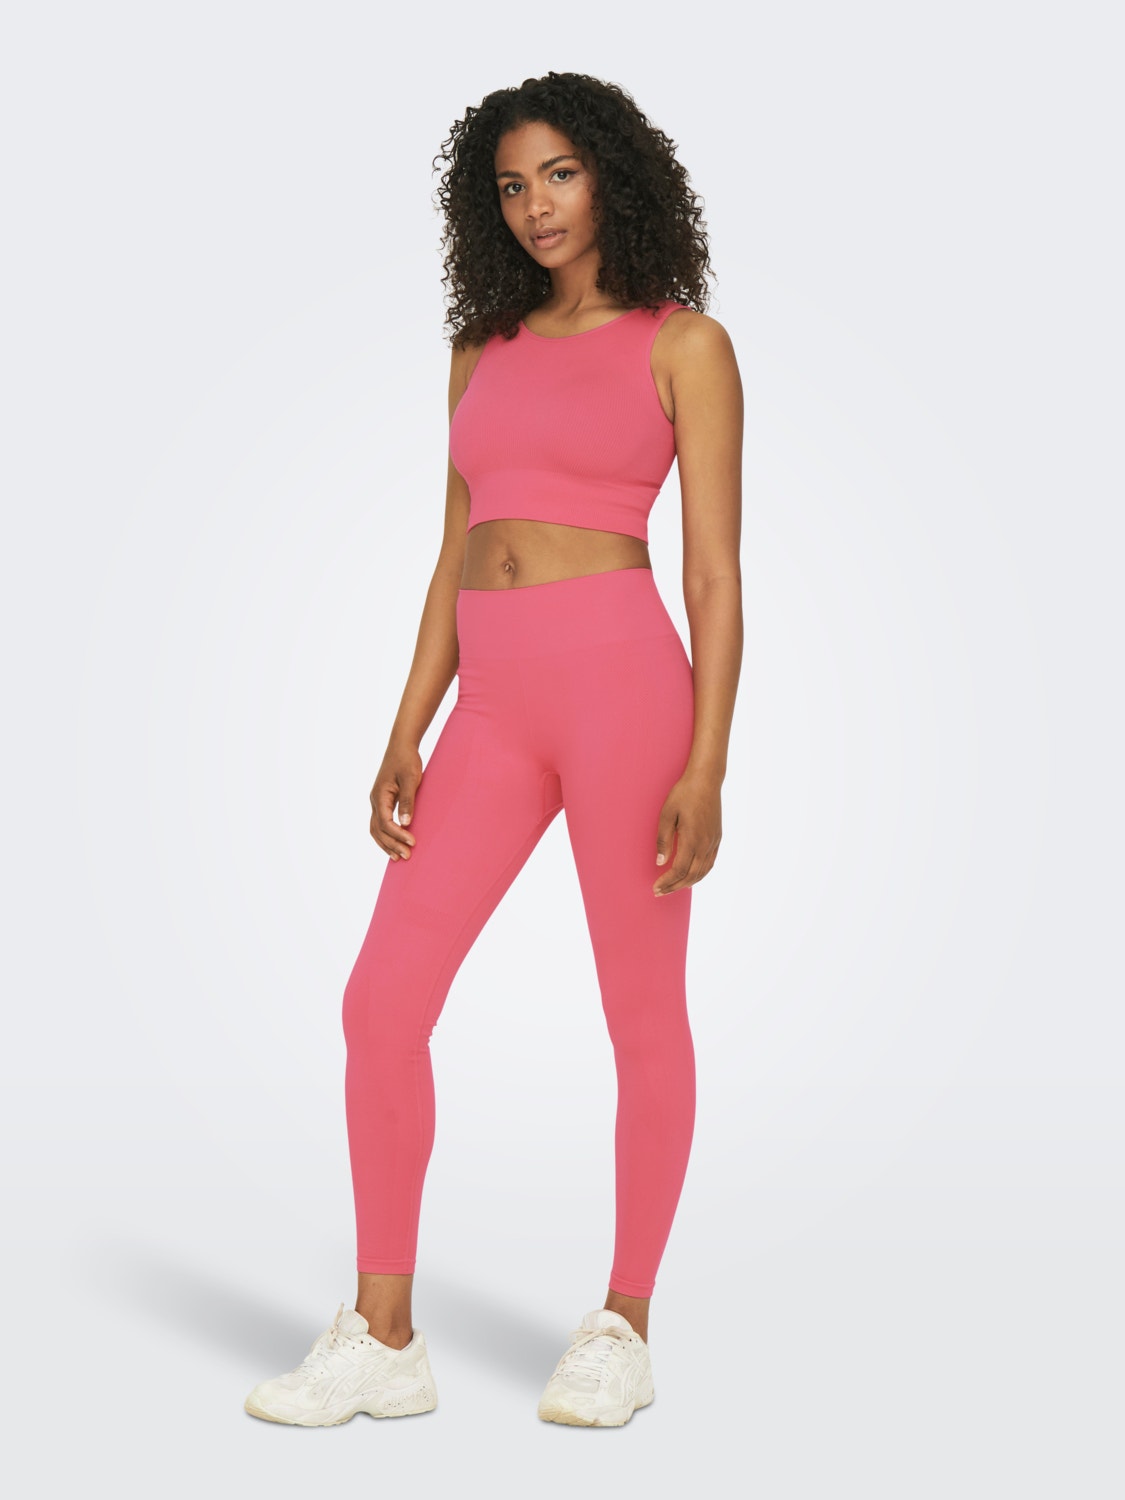 ONLY Slim Fit Hohe Taille Leggings -Sun Kissed Coral - 15280593